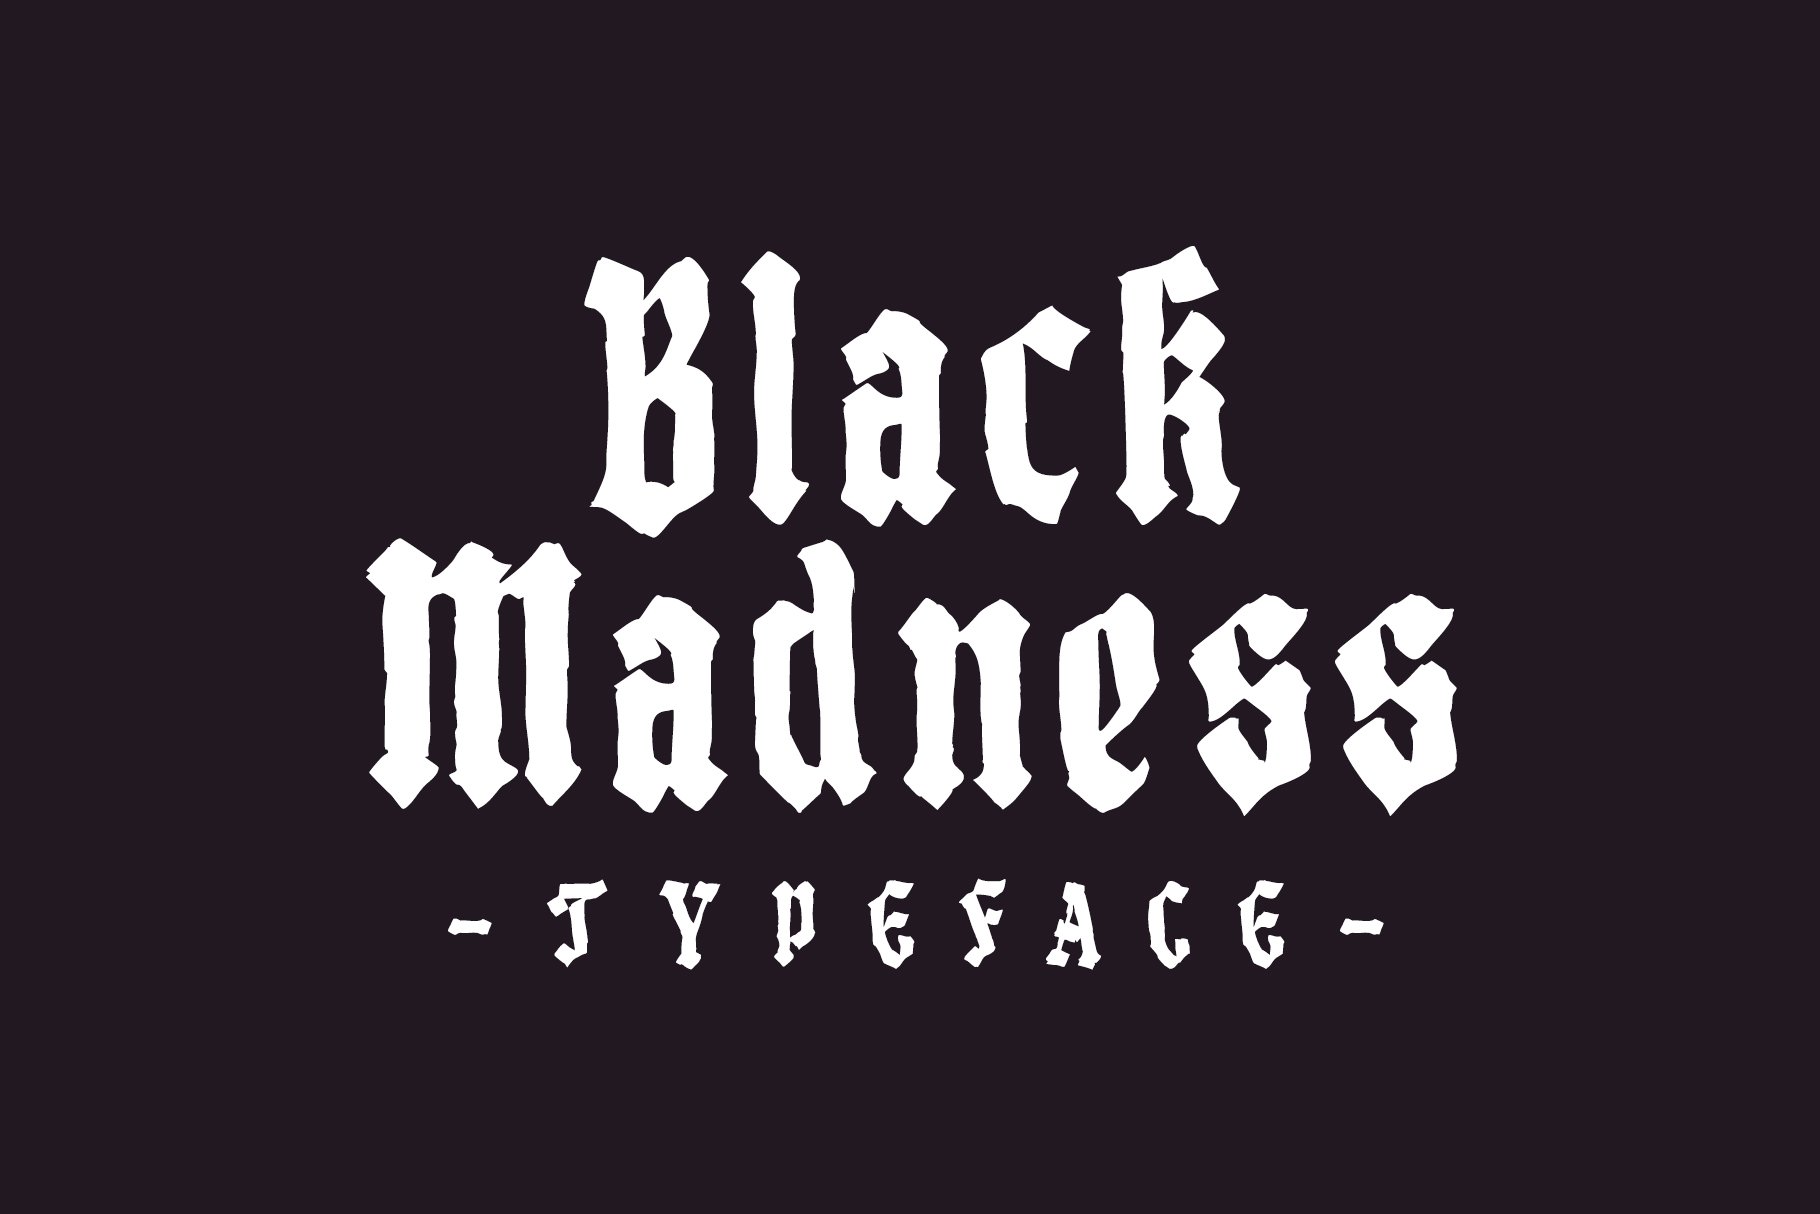 Black Madness cover image.